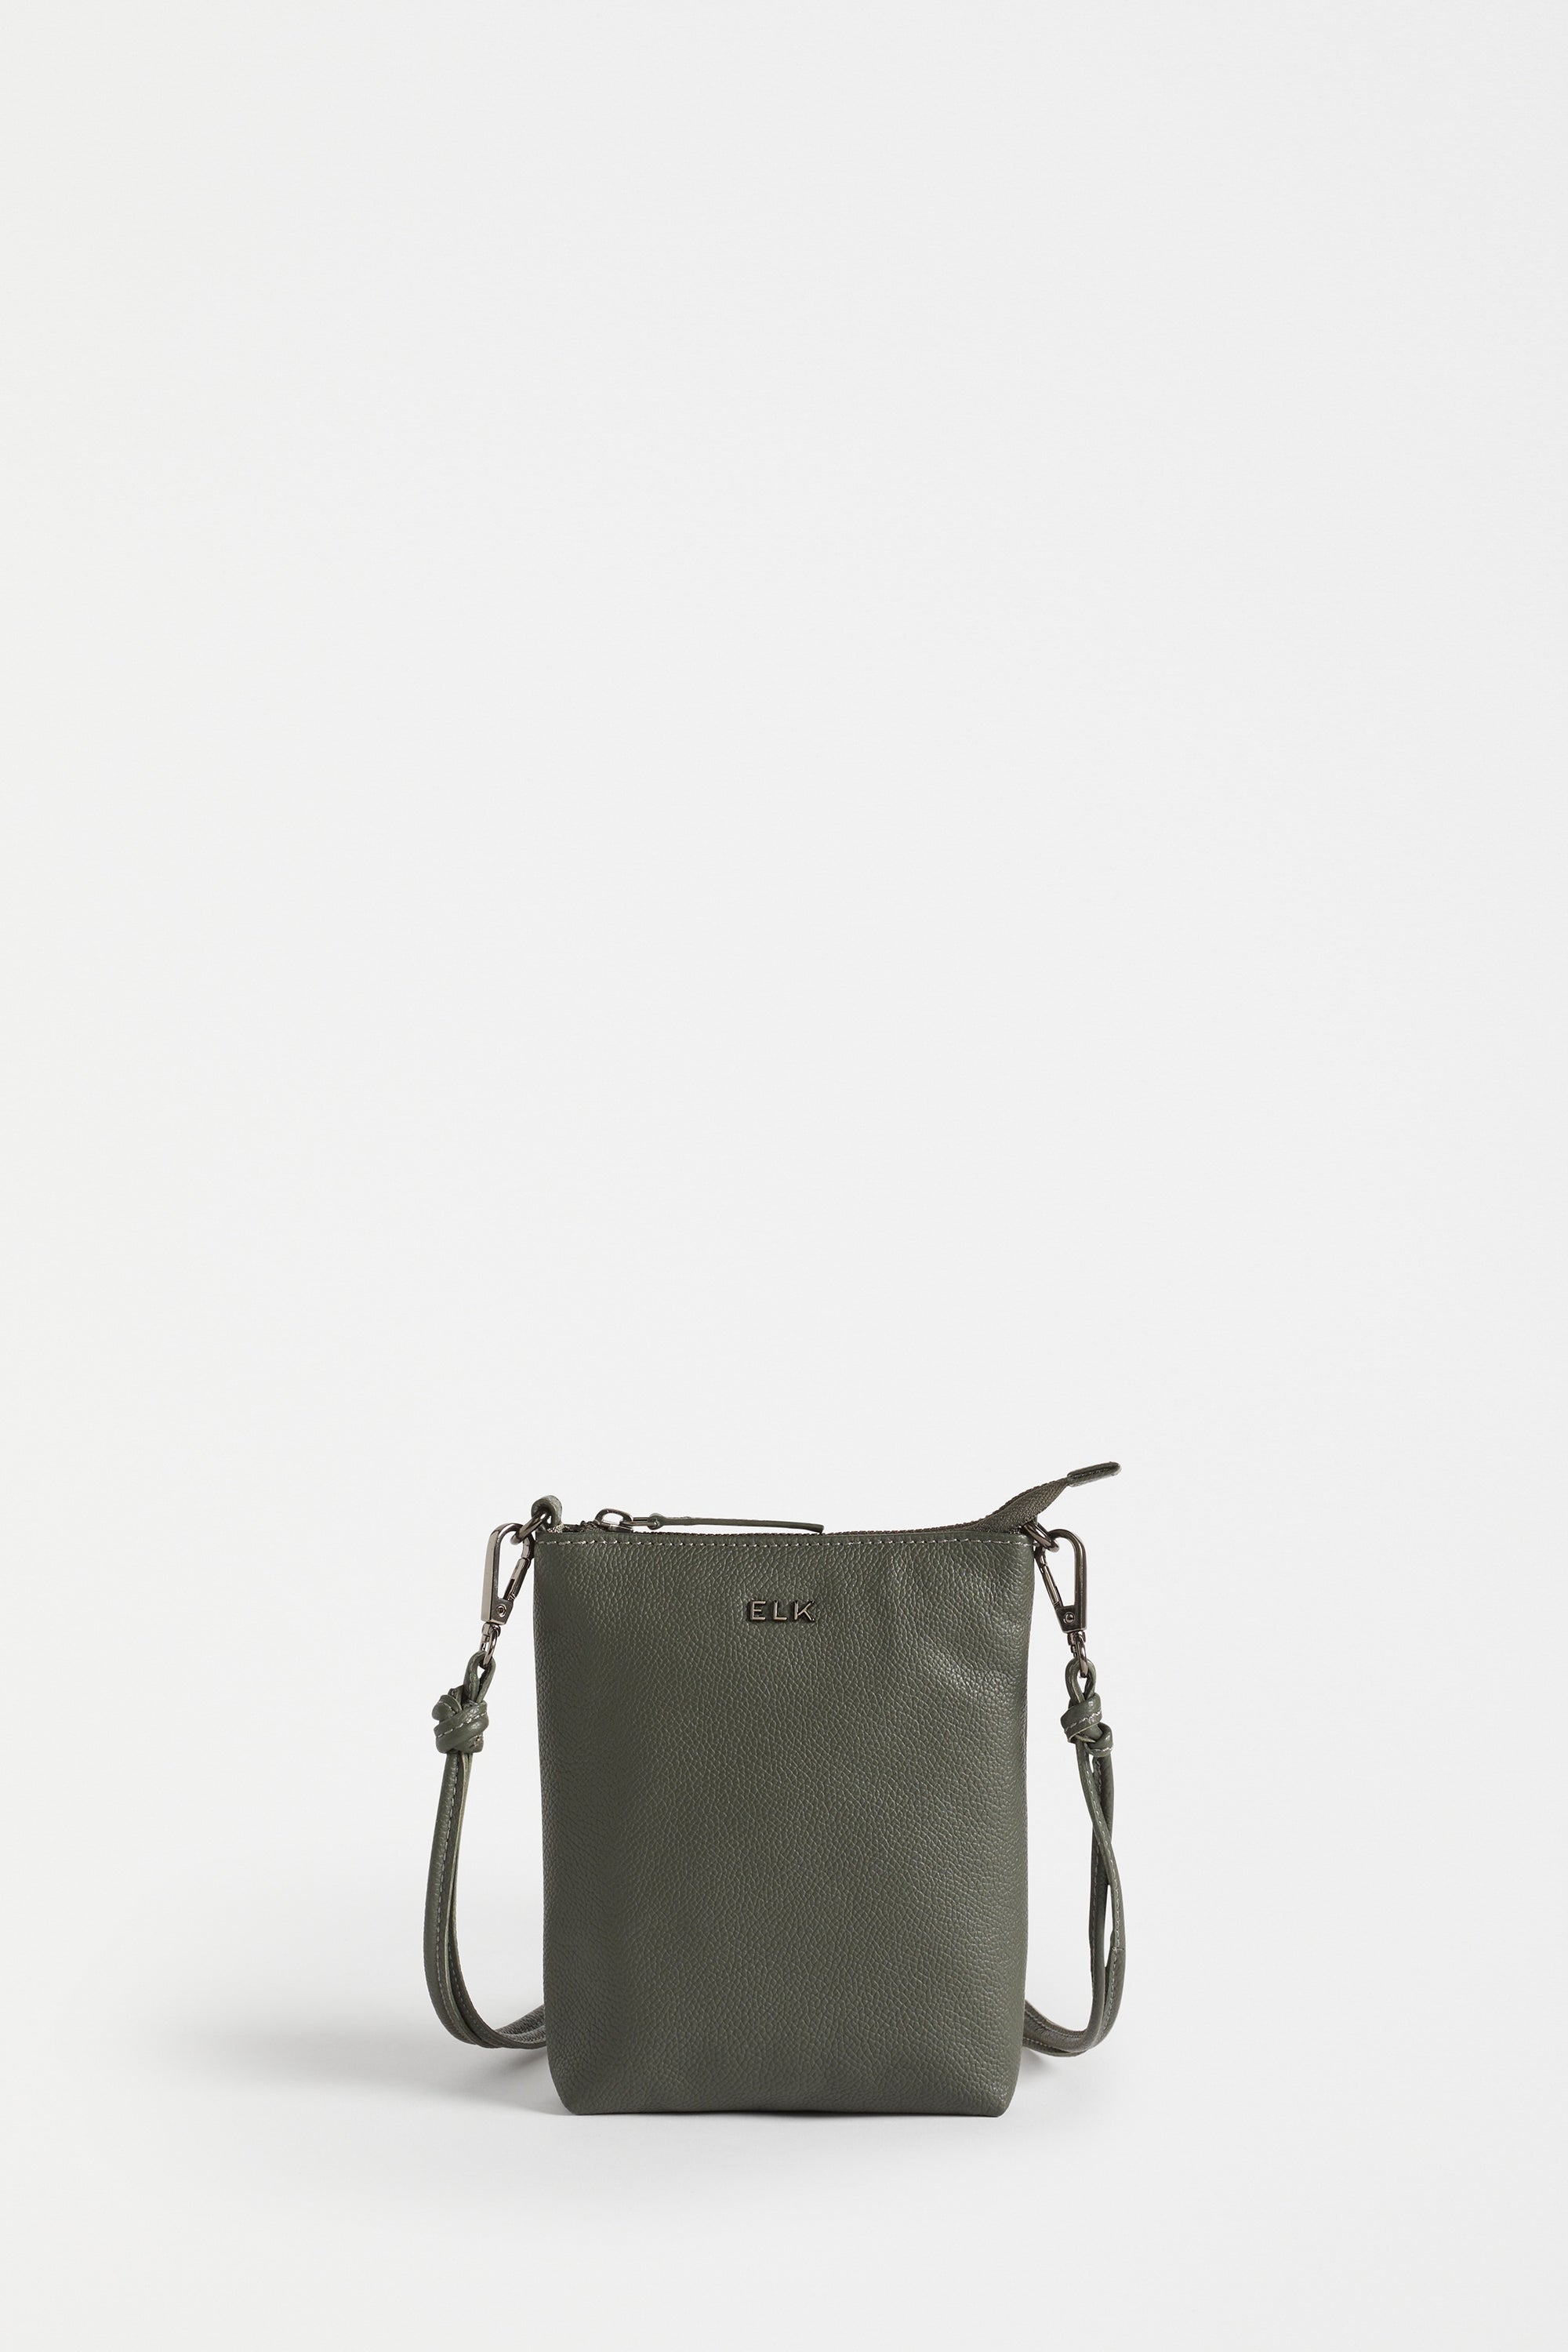 Elk Ondo Pouch - Olive